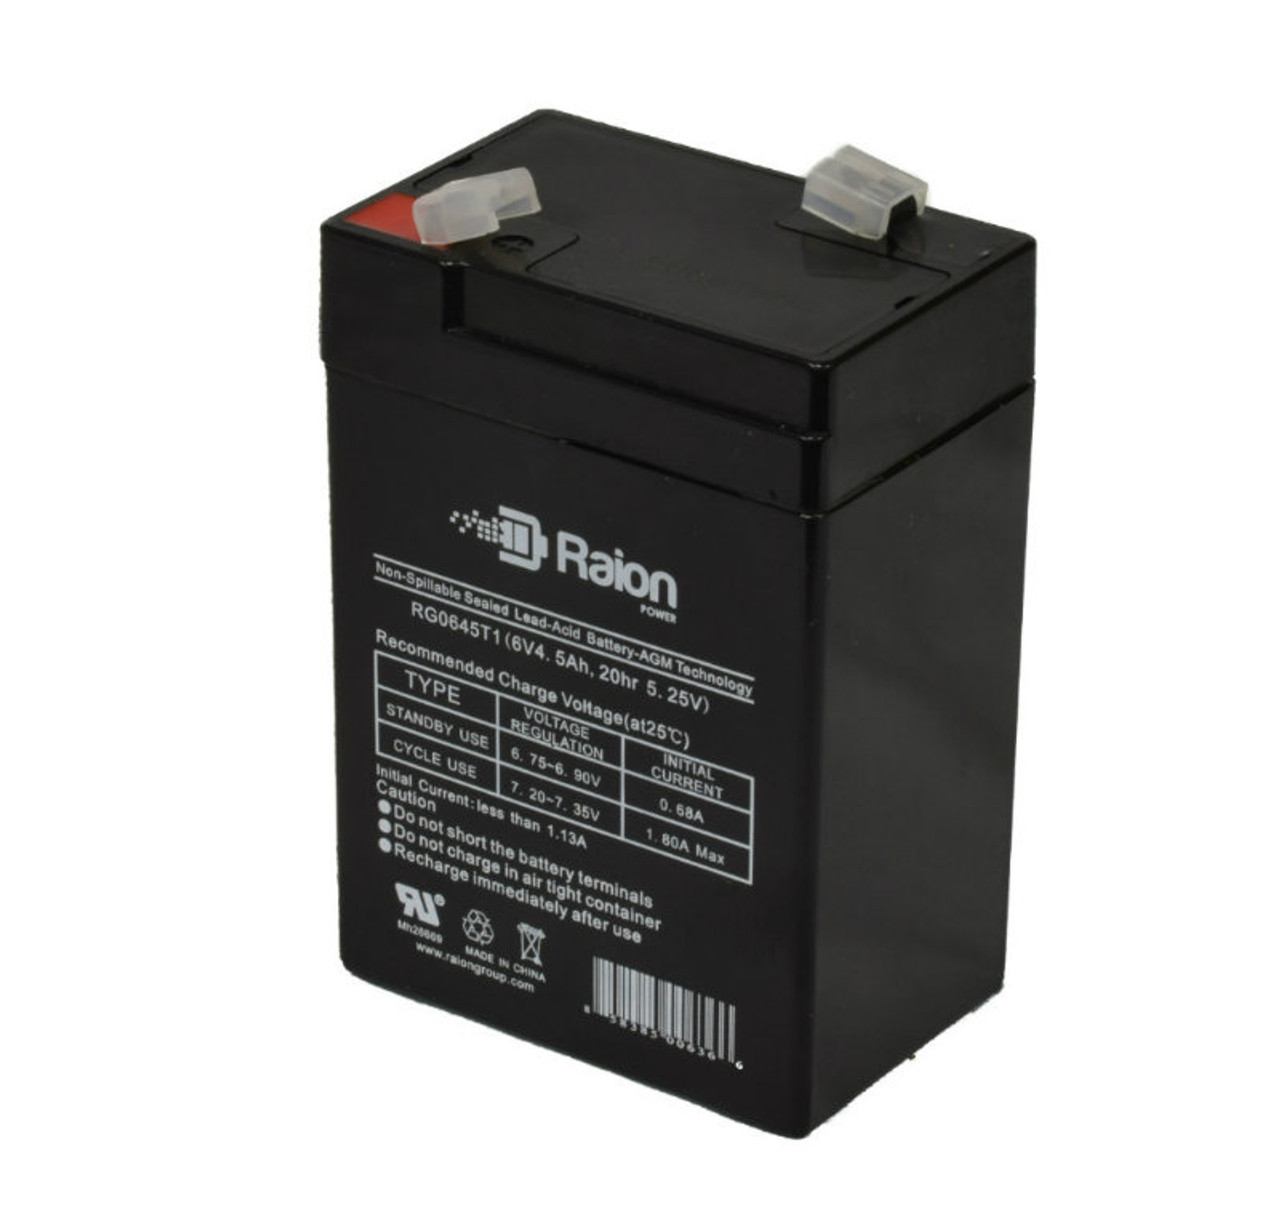 Raion Power RG0645T1 6V 4.5Ah Replacement Battery Cartridge for Lithonia ELB0604